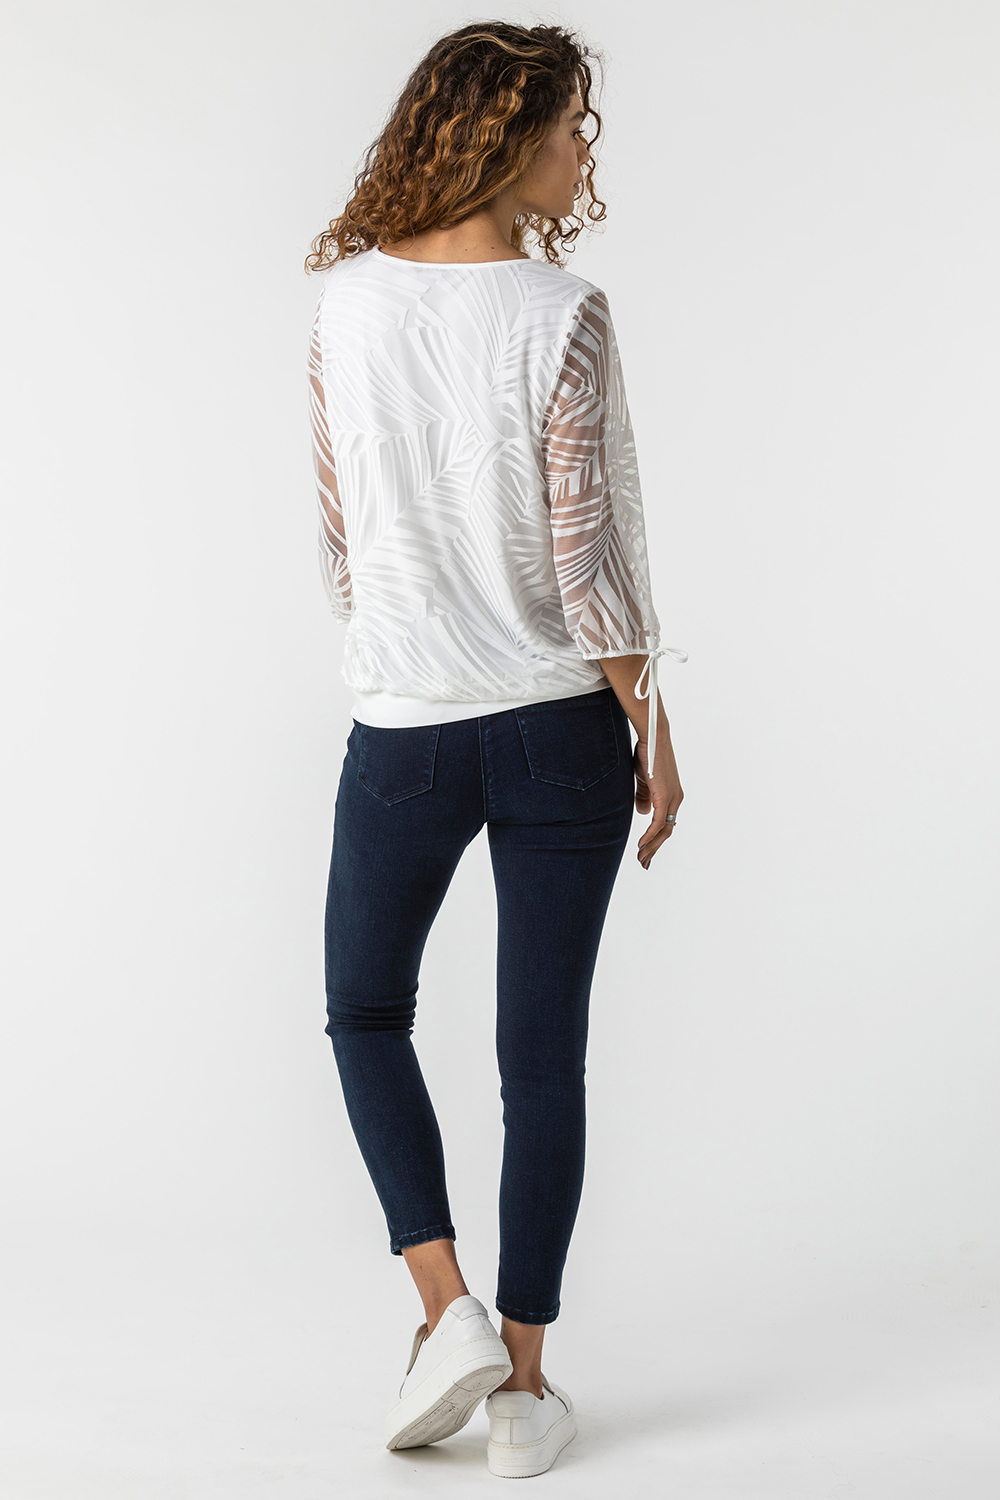 Ivory  Overlay Burnout Print Top, Image 2 of 5